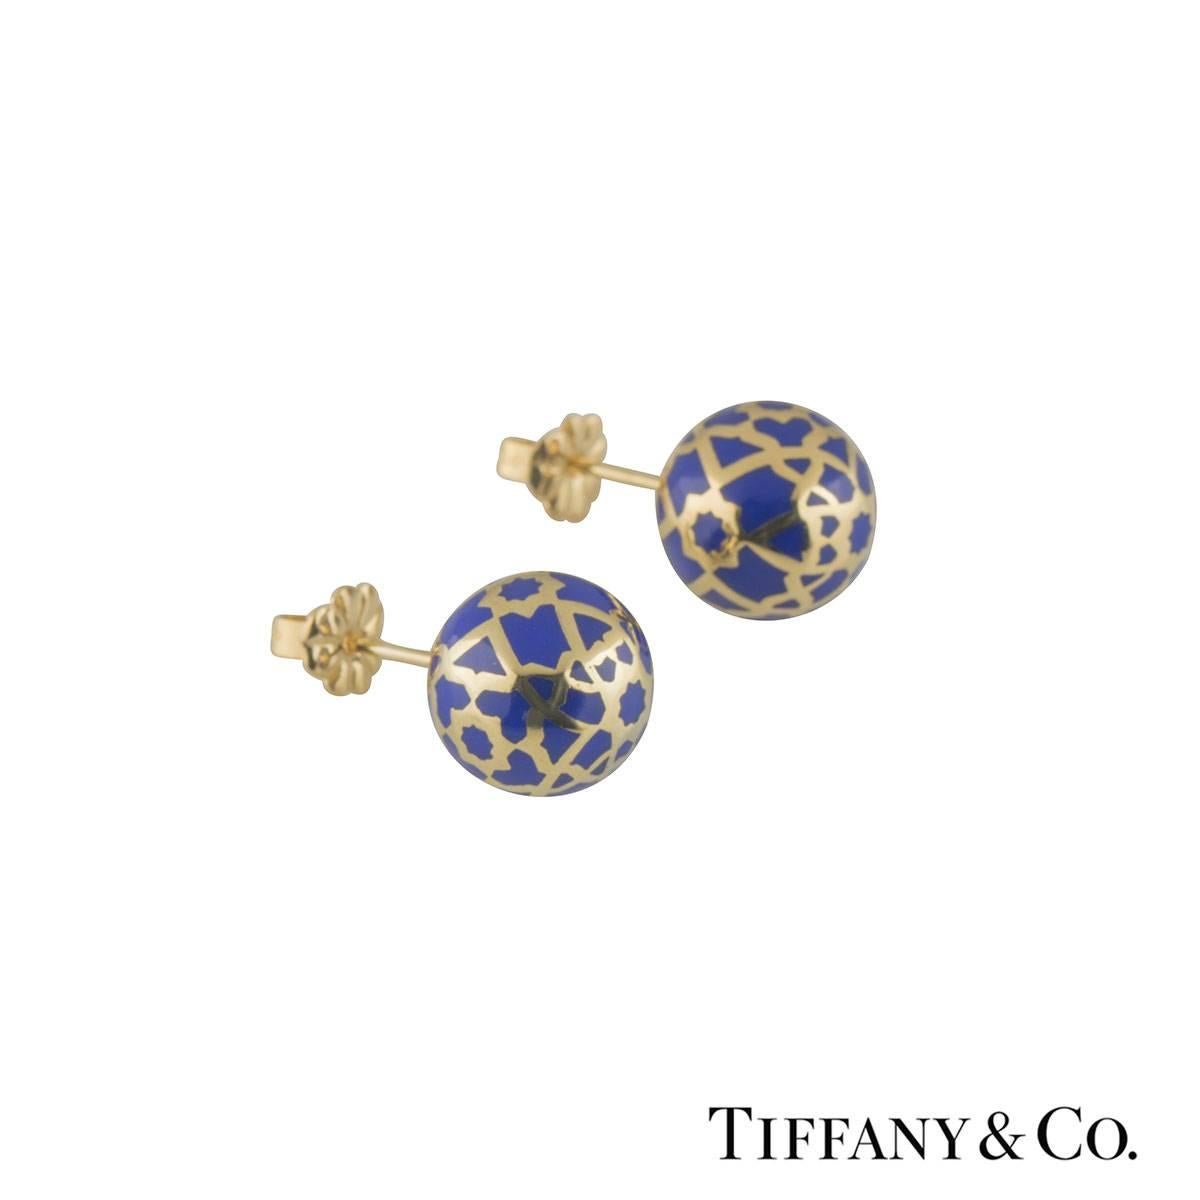 A trendy 18k yellow gold Tiffany & Co. stud earrings. The earrings comprise of a gold ball with blue enamel patterned throughout the ball. The earring measures 12mm in diameter and features a post and push back butterfly. The earrings have a